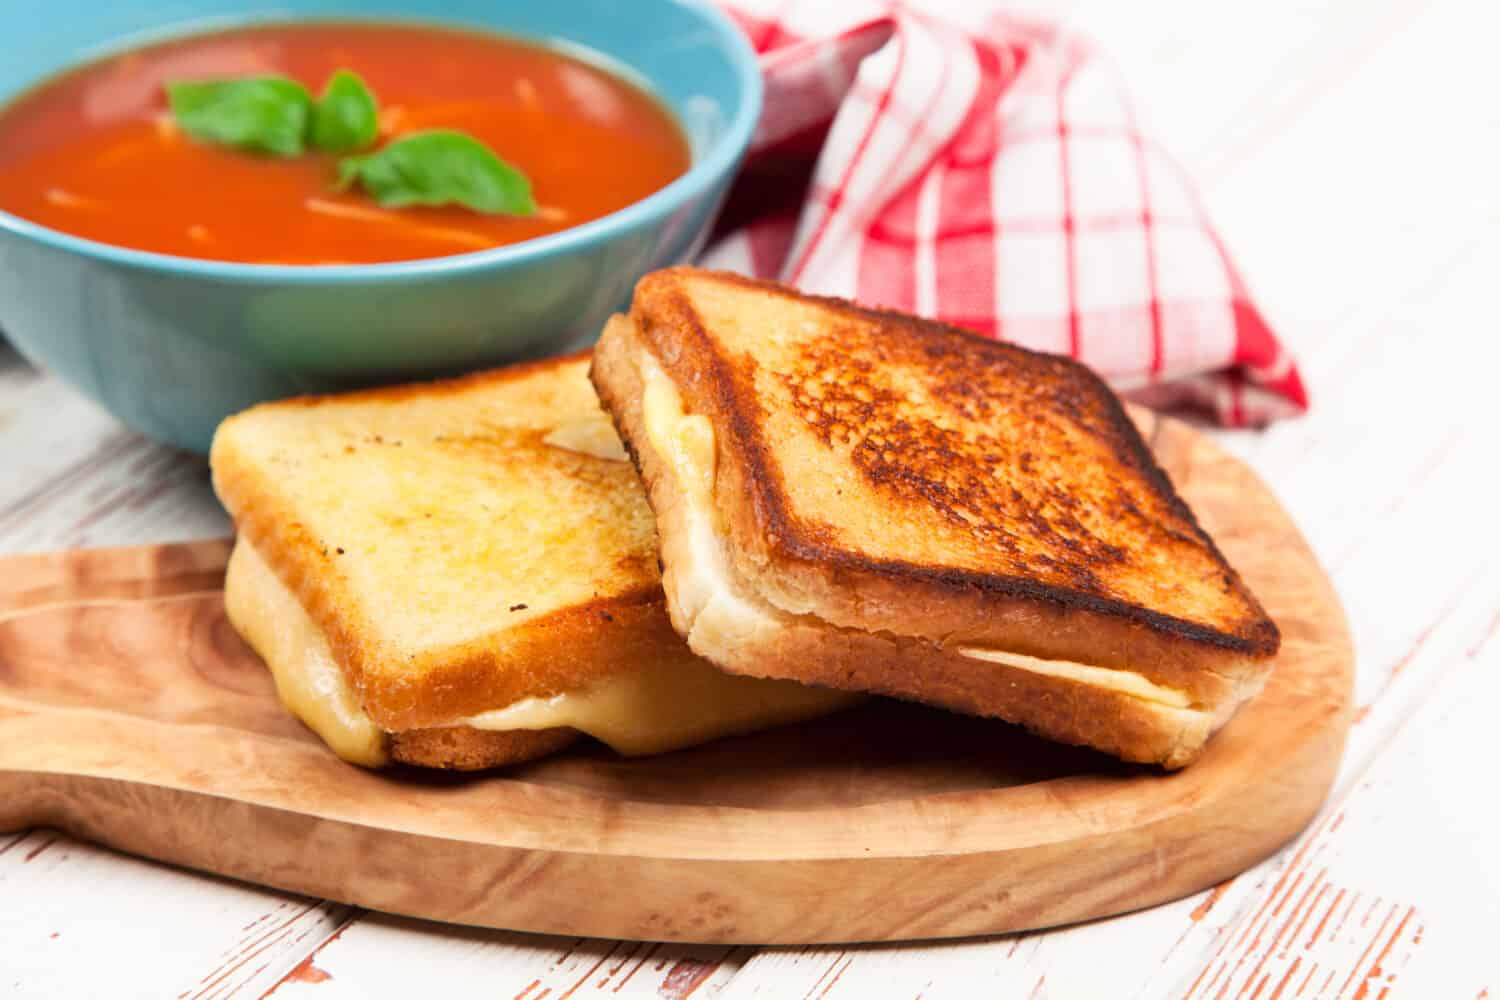 Tomato soup with cheese sandwich